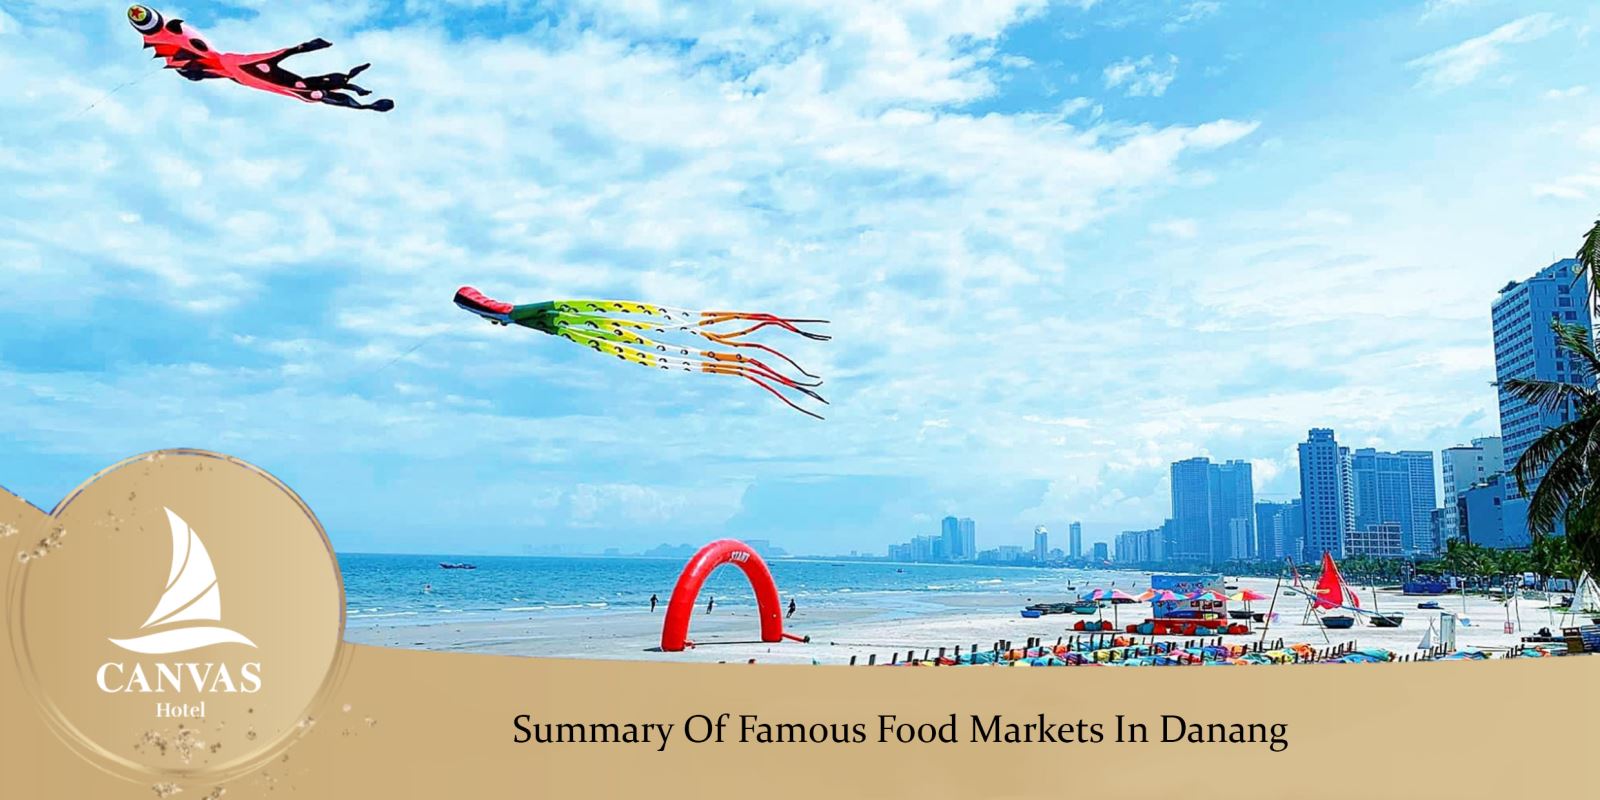 Summary Of Famous Food Markets In Danang